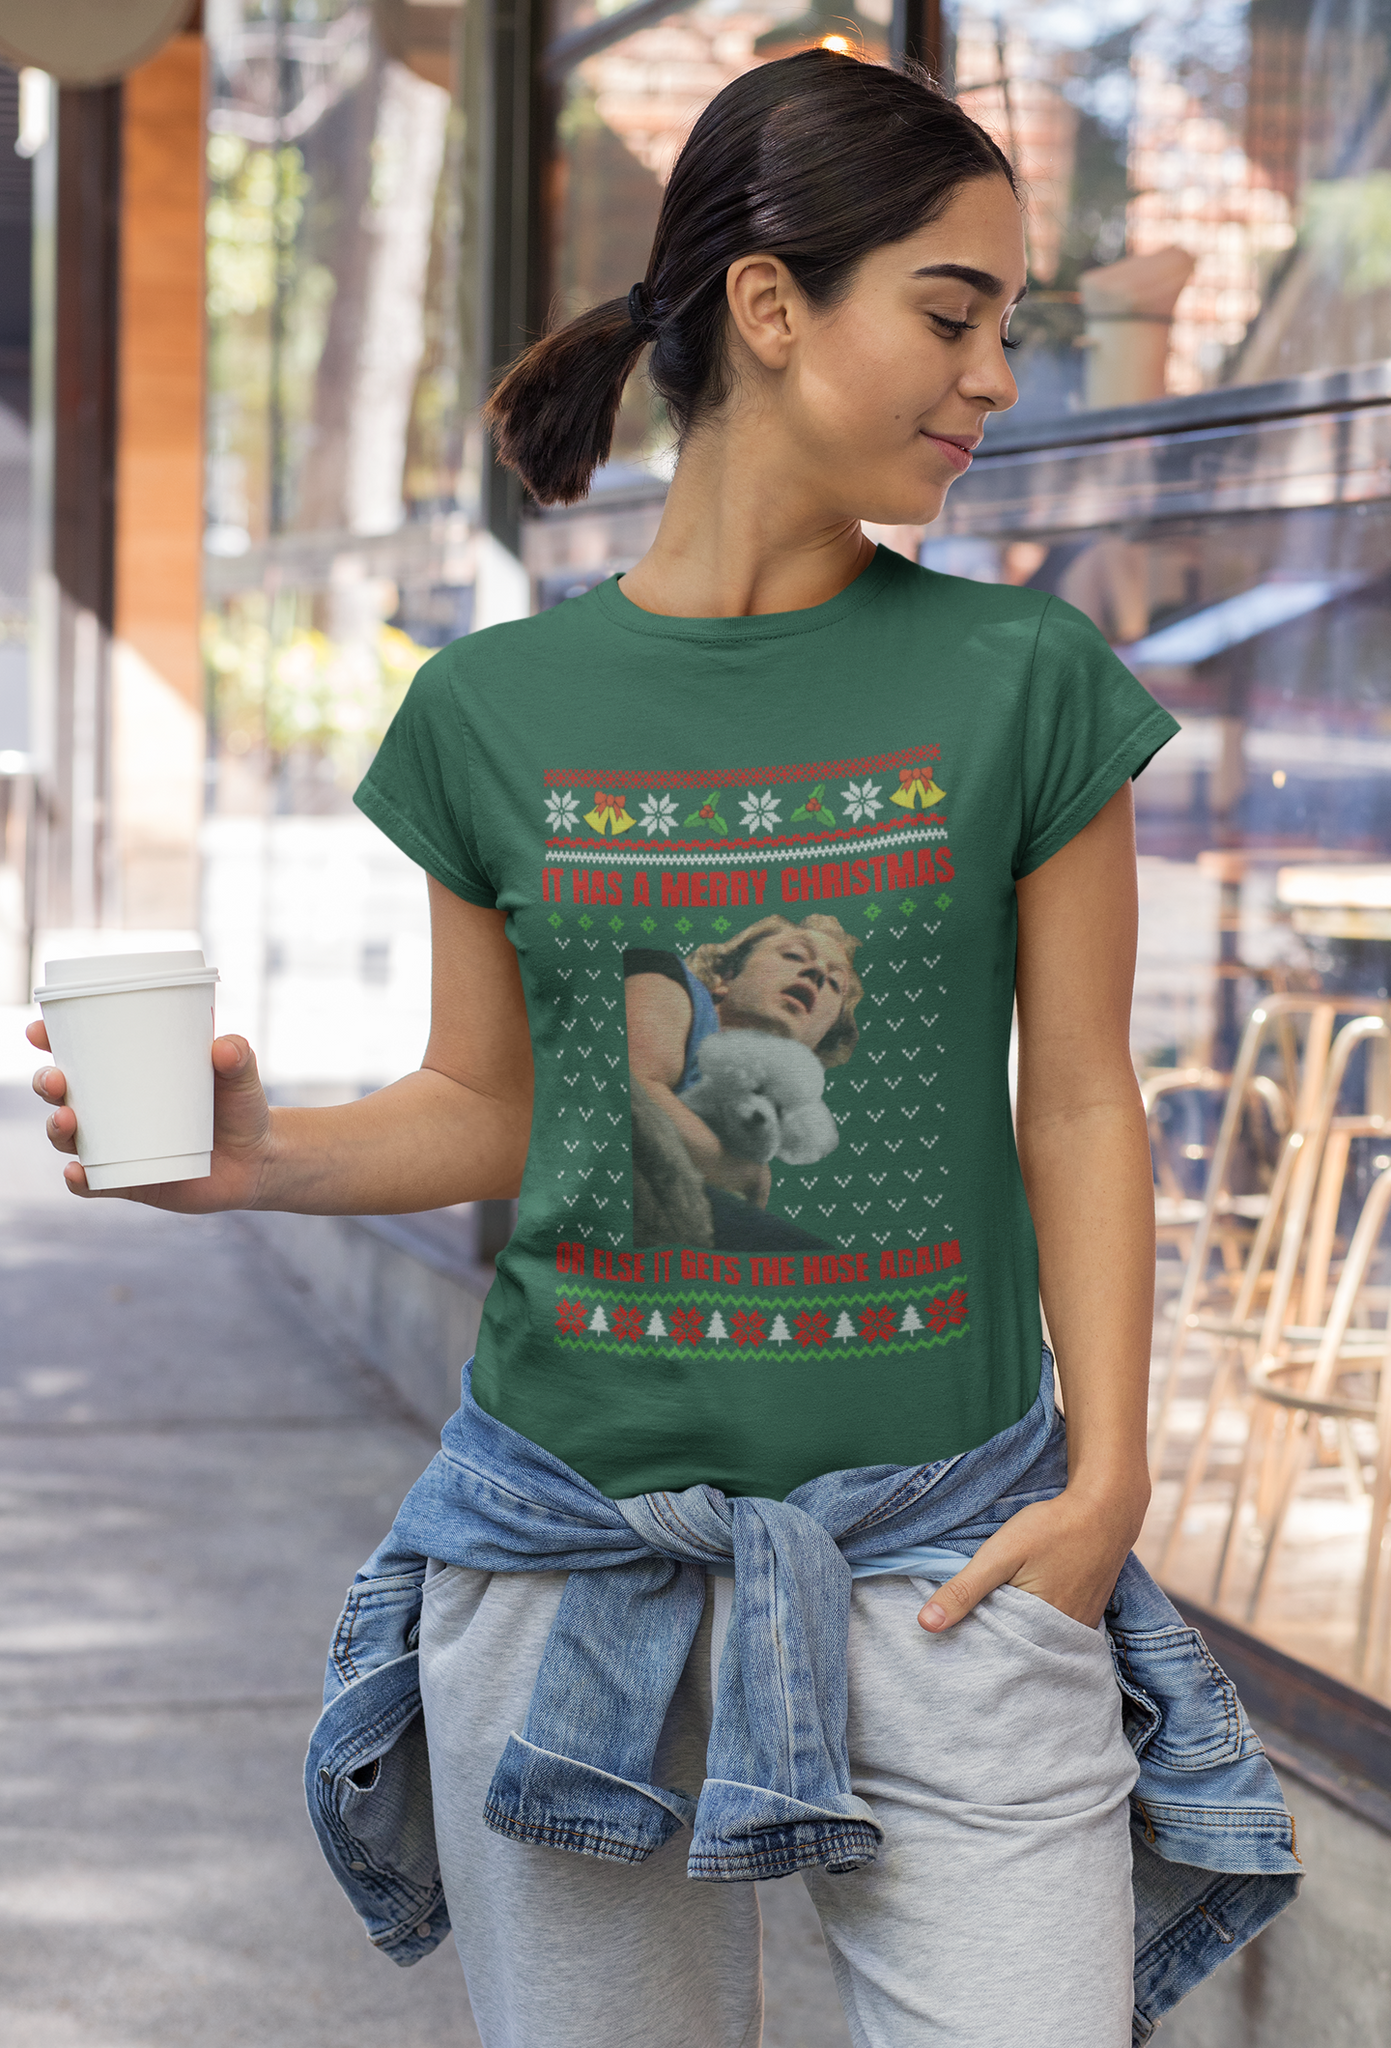 Silence Of The Lamb Ugly Sweater Shirt, It Has A Merry Christmas Tshirt, Jame Gumb T Shirt, Christmas Gifts, Halloween Gifts